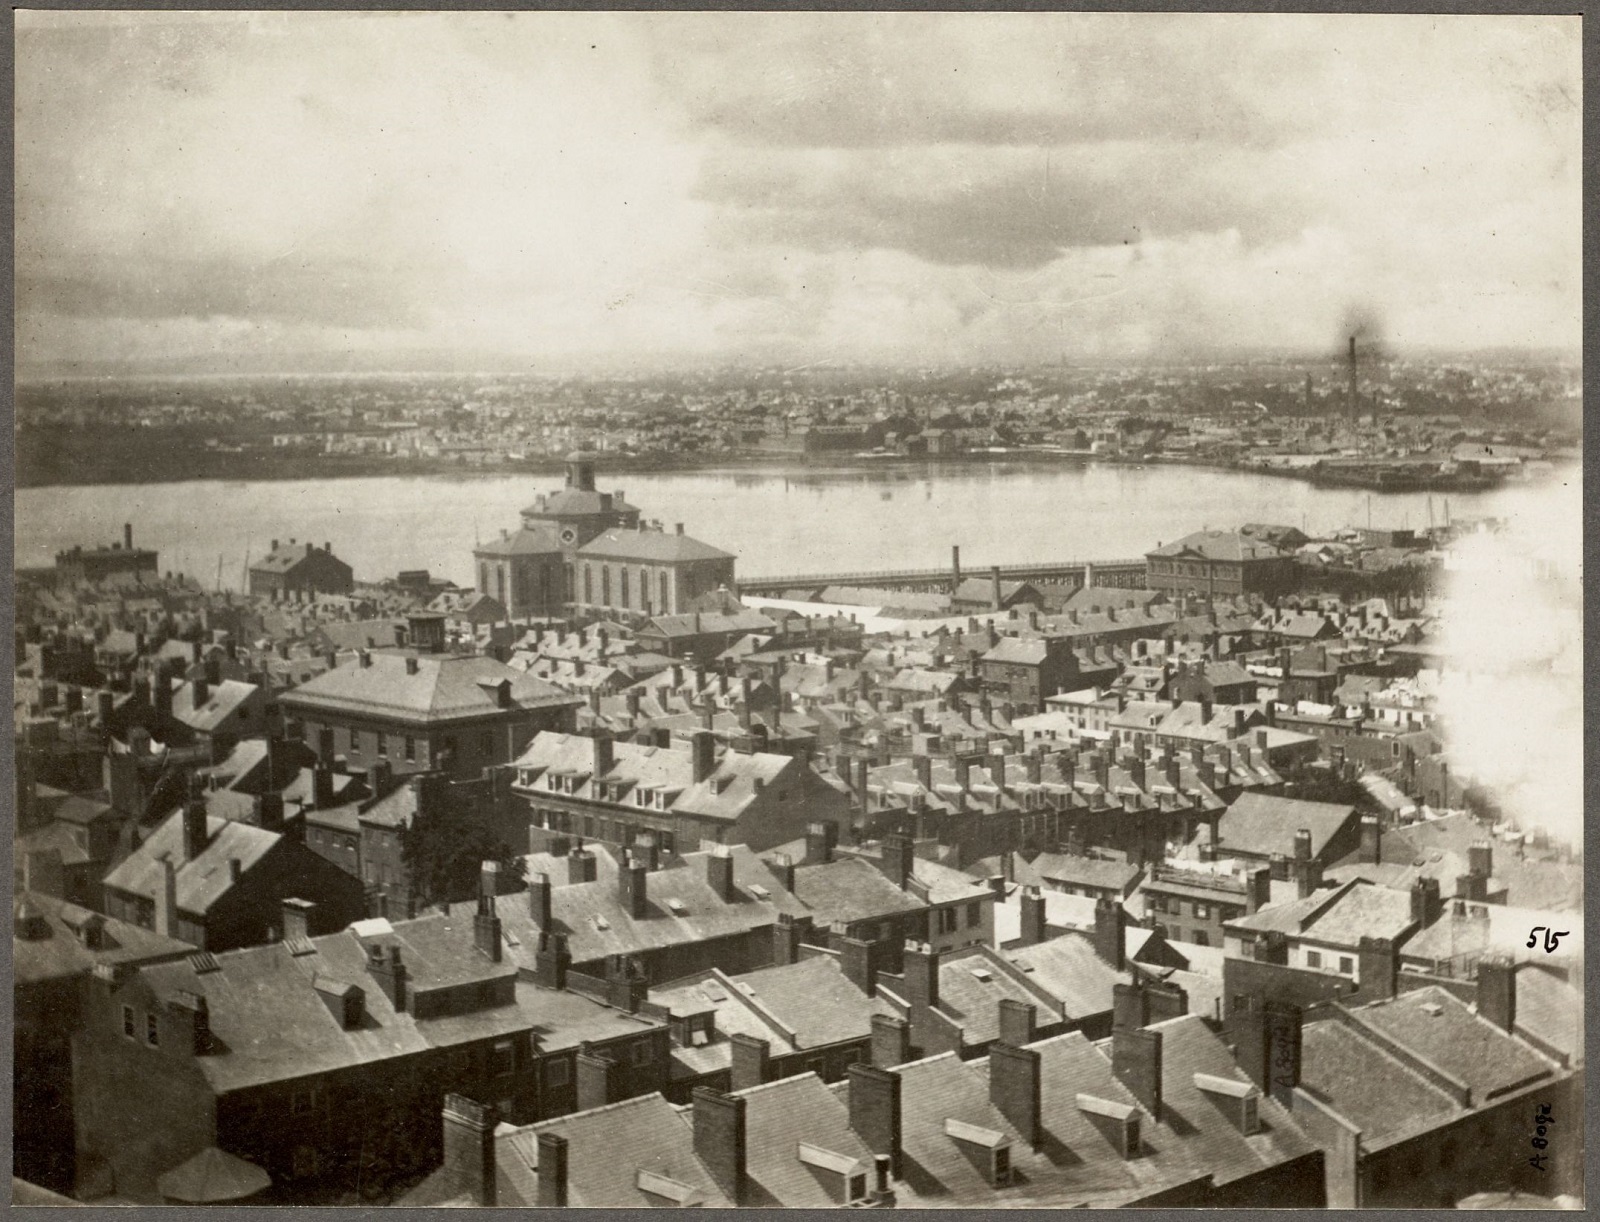 Aerial view looking onto the north slope of Beacon Hill with the Charles River and Cambridge in the background.